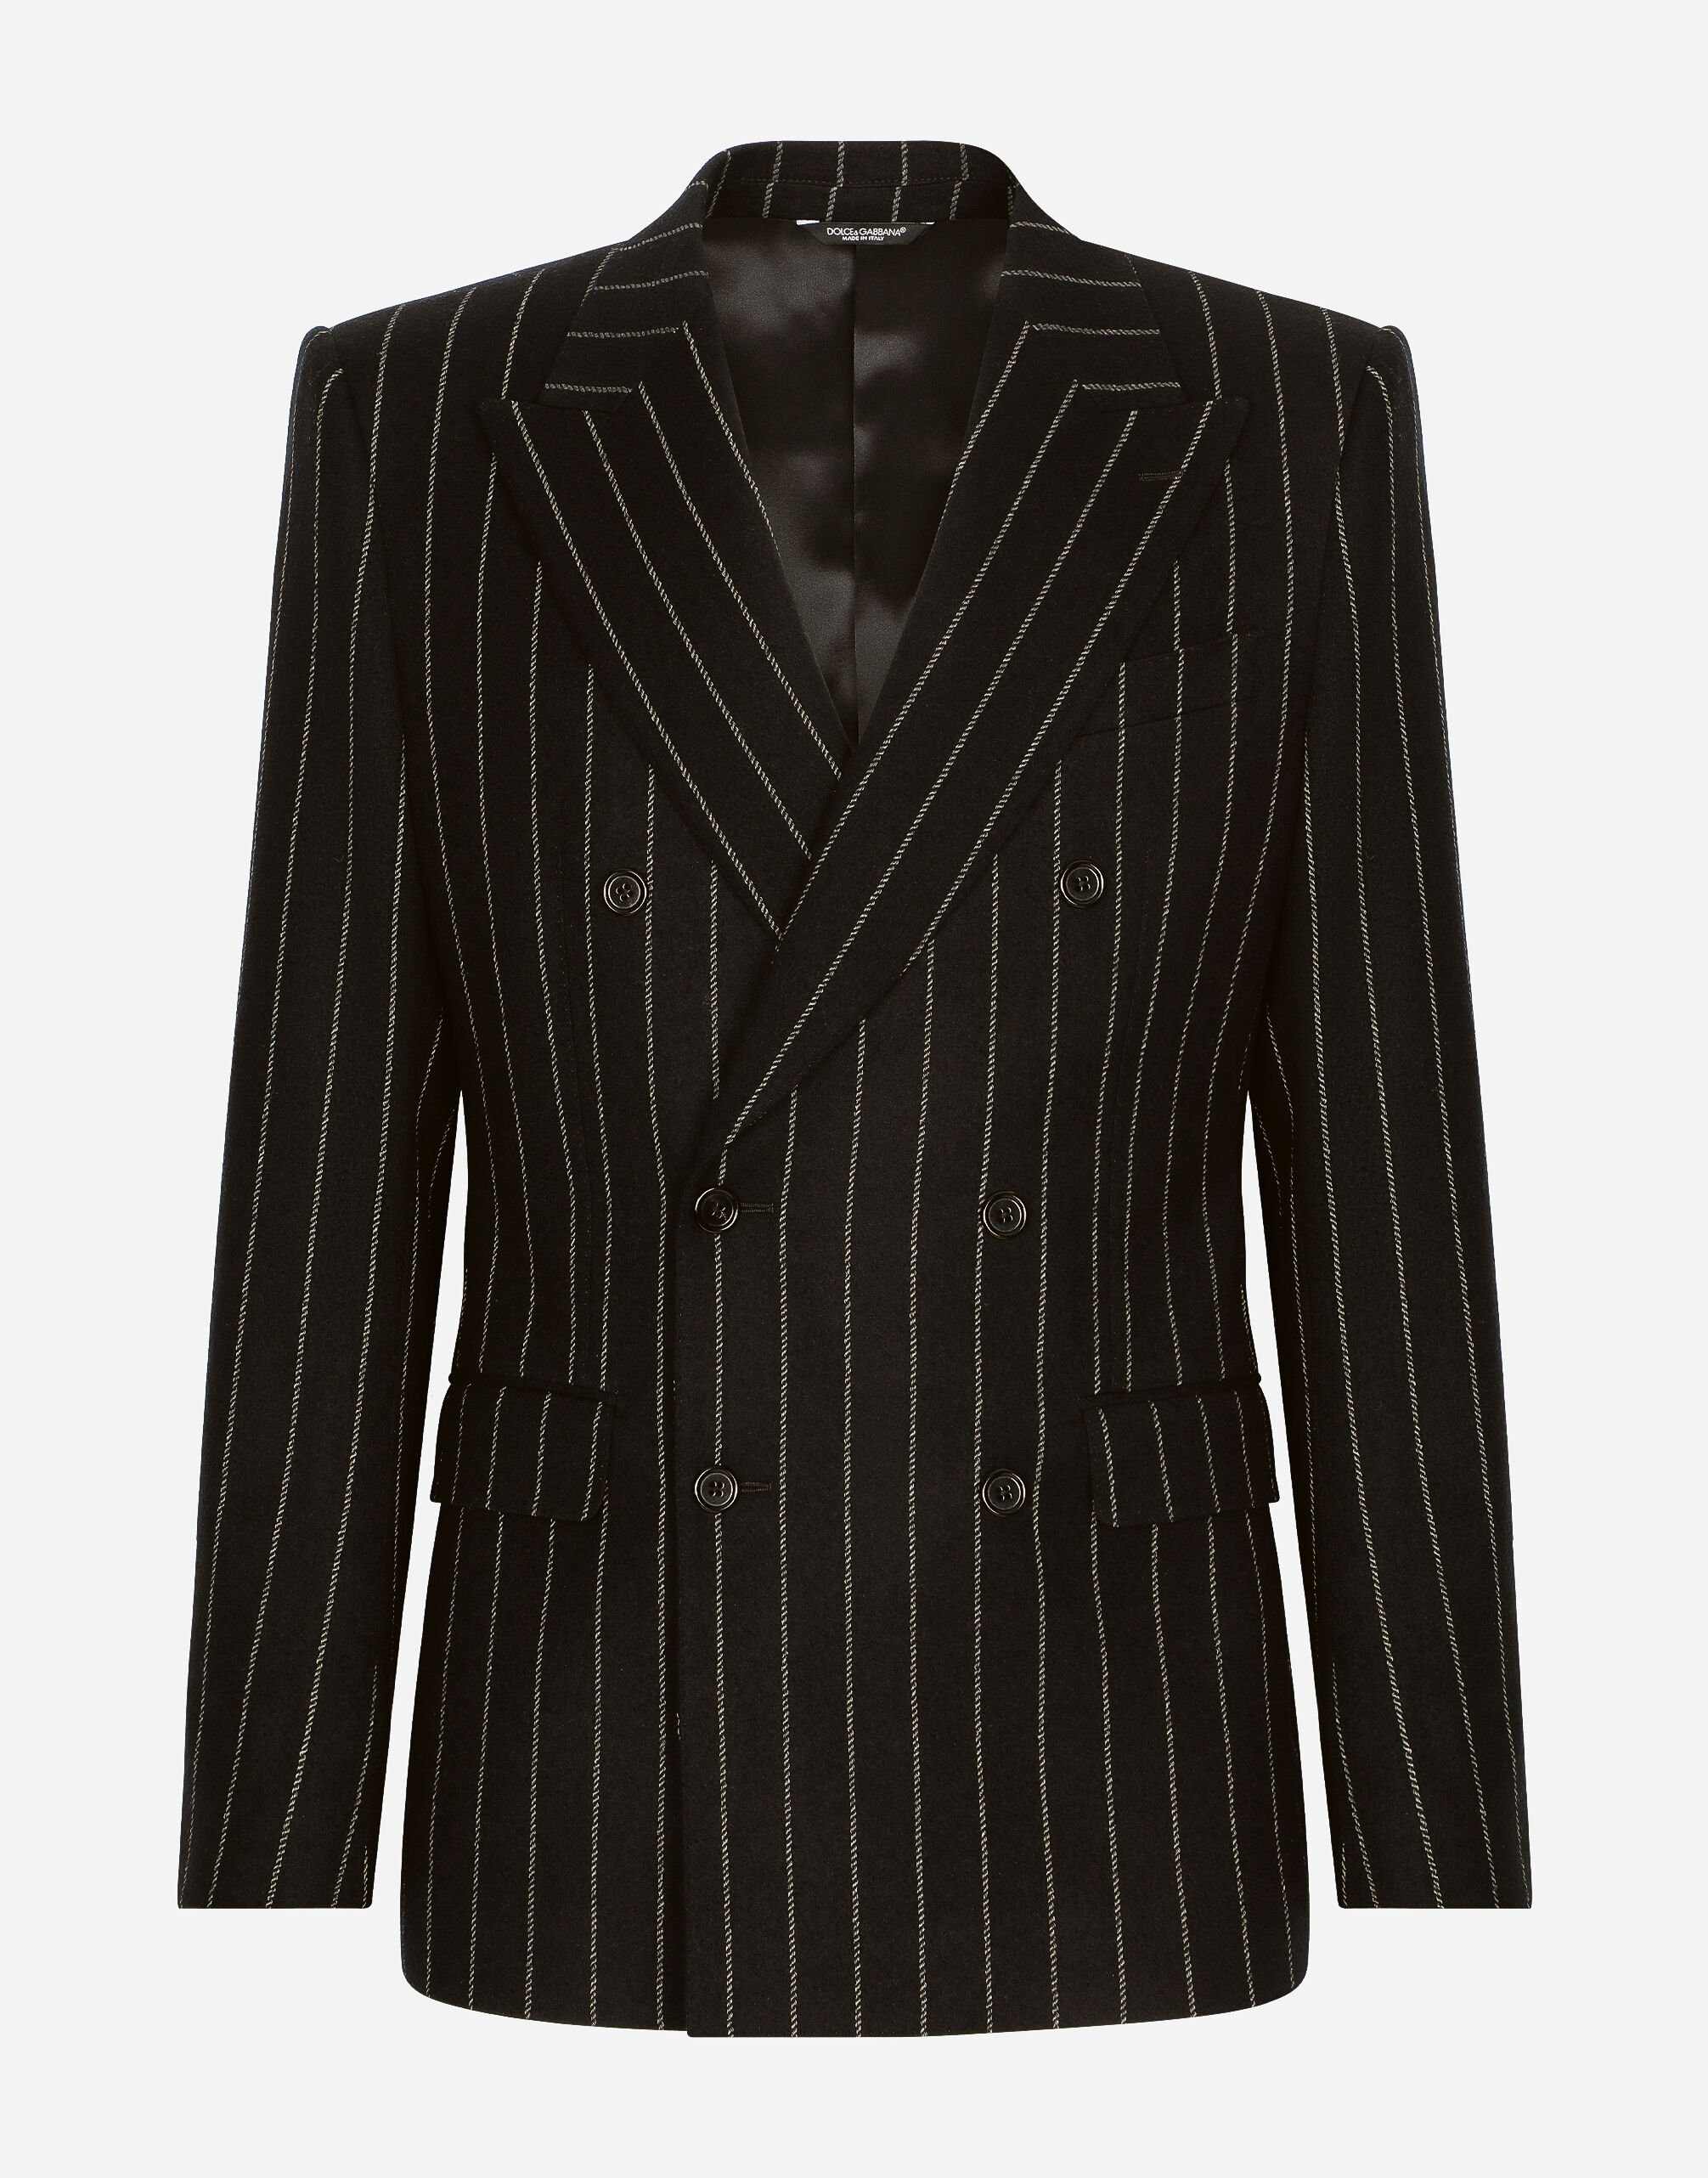 Dolce&Gabbana Double-breasted jacket in pinstripe stretch wool Multicolor G2QU6TFRBCH